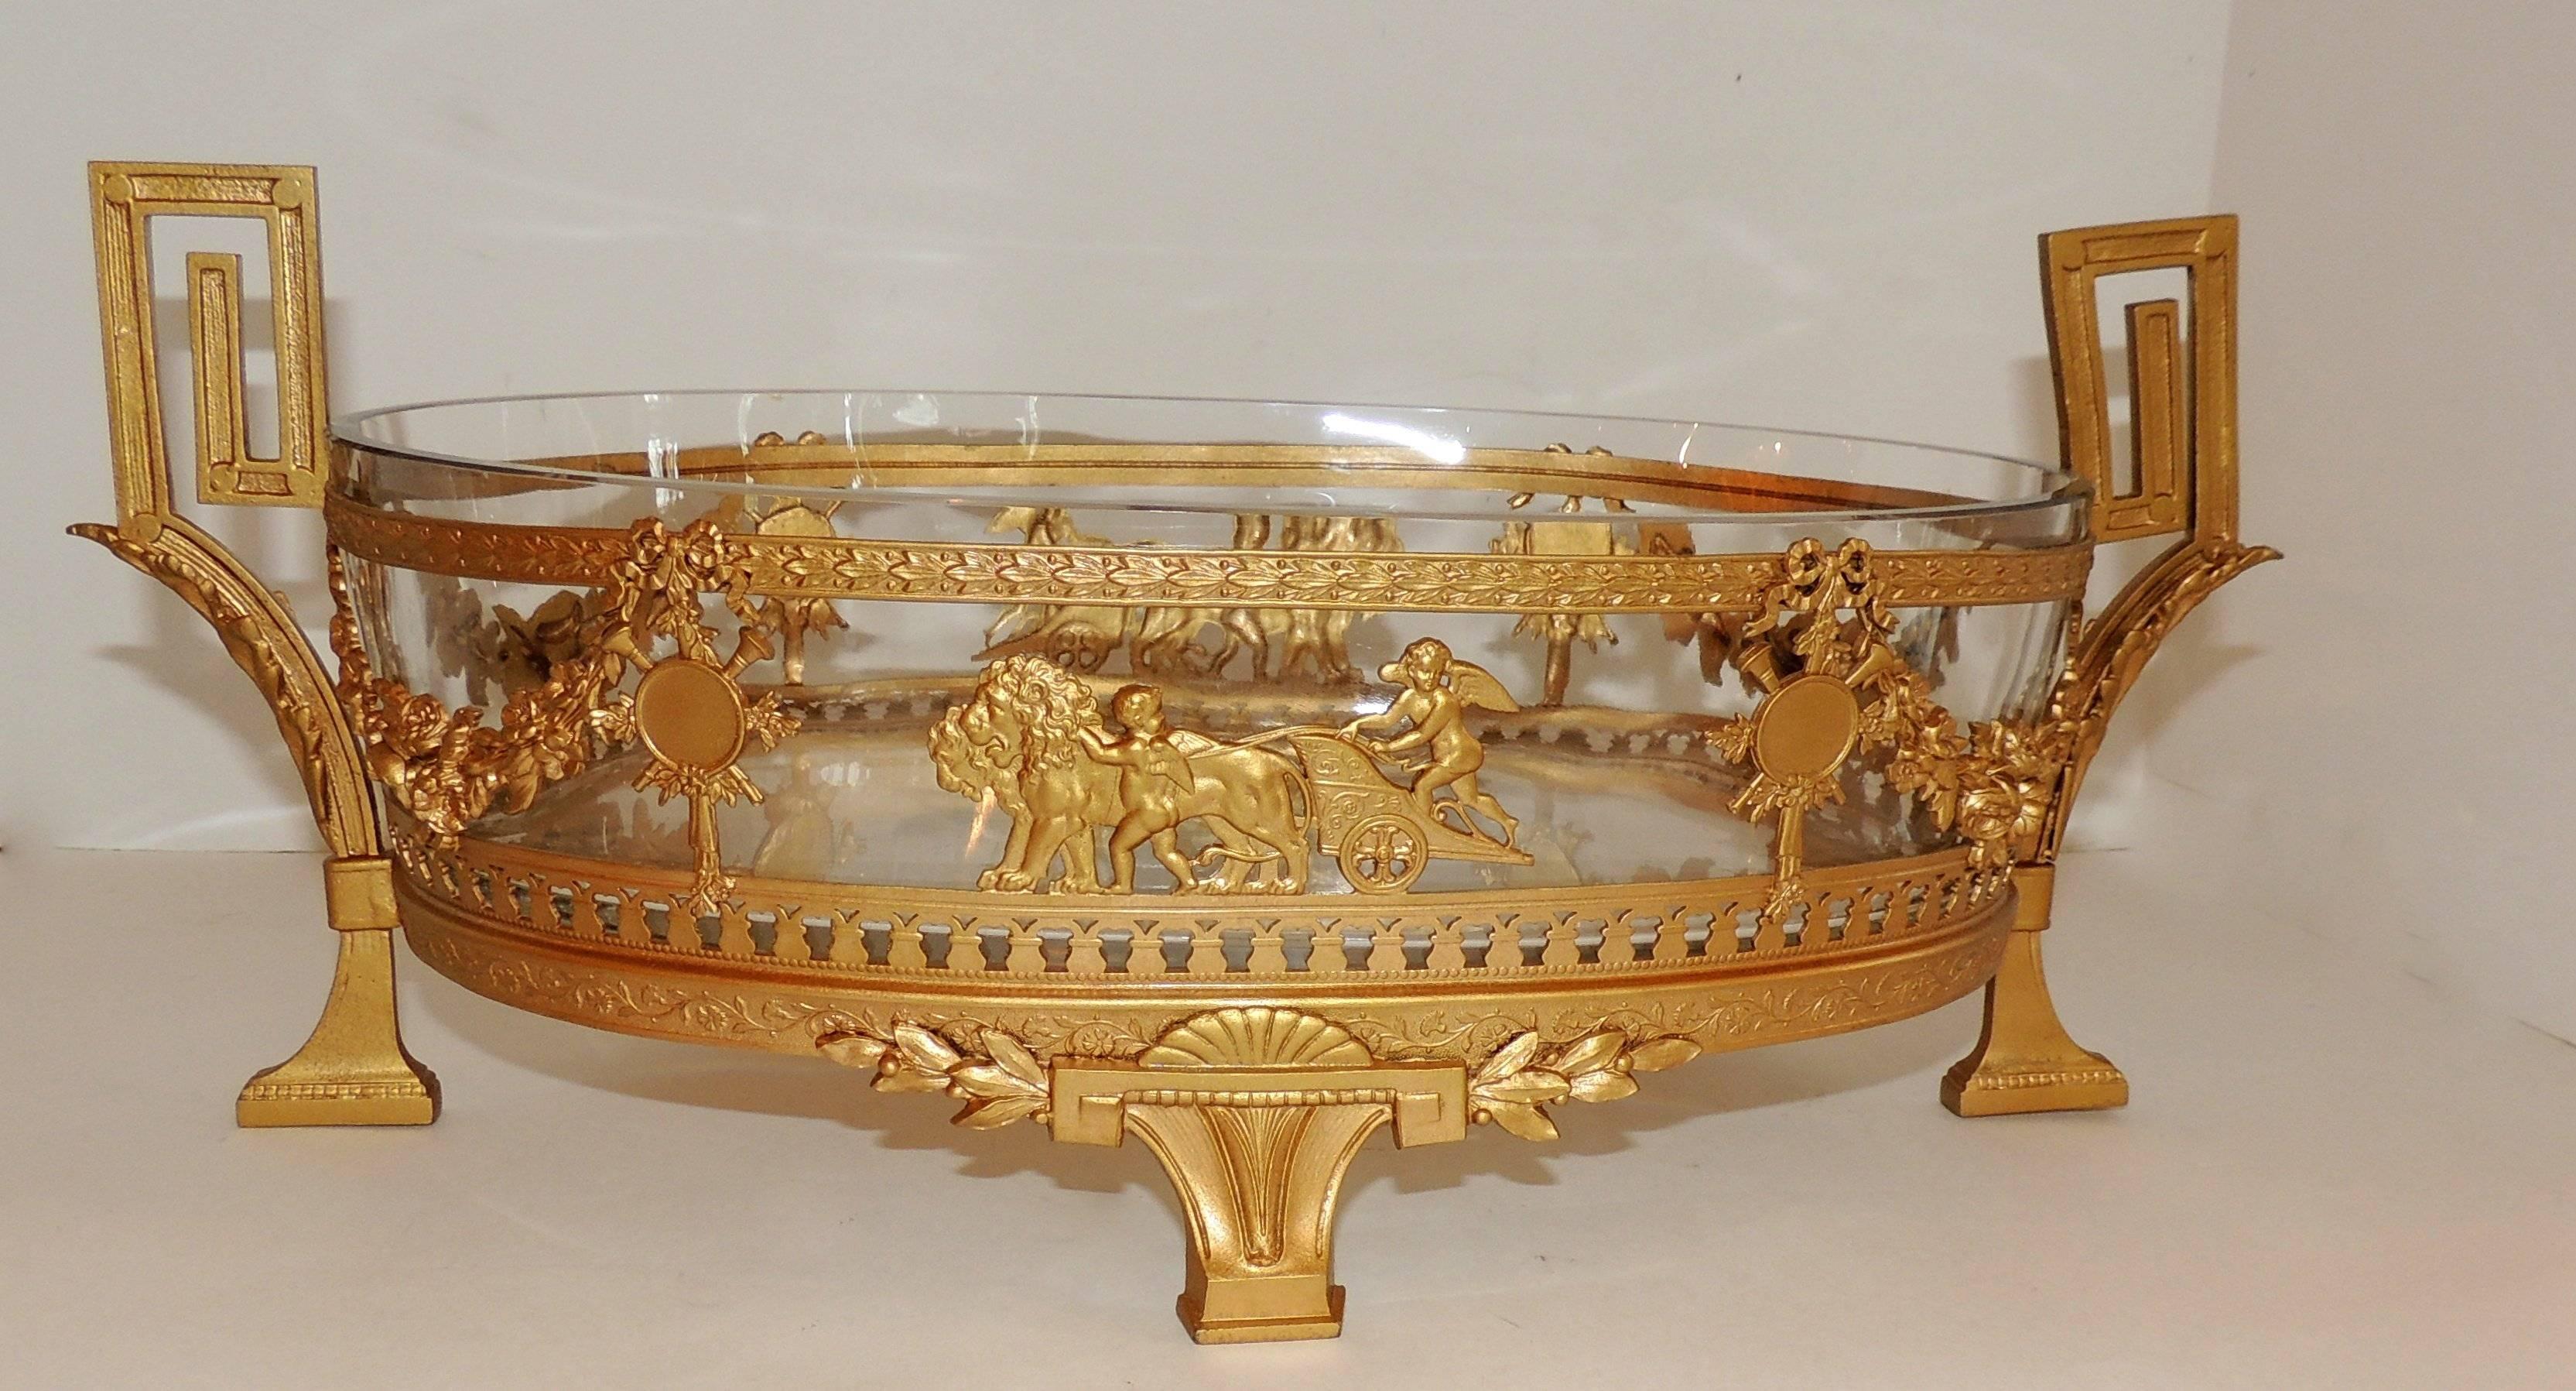 Wonderful French empire ormolu dore bronze oval neoclassical gilt glass insert centerpiece decorated with swags and musical instruments and finished in the middle with a center medallion of a putti on a chariot with horses.